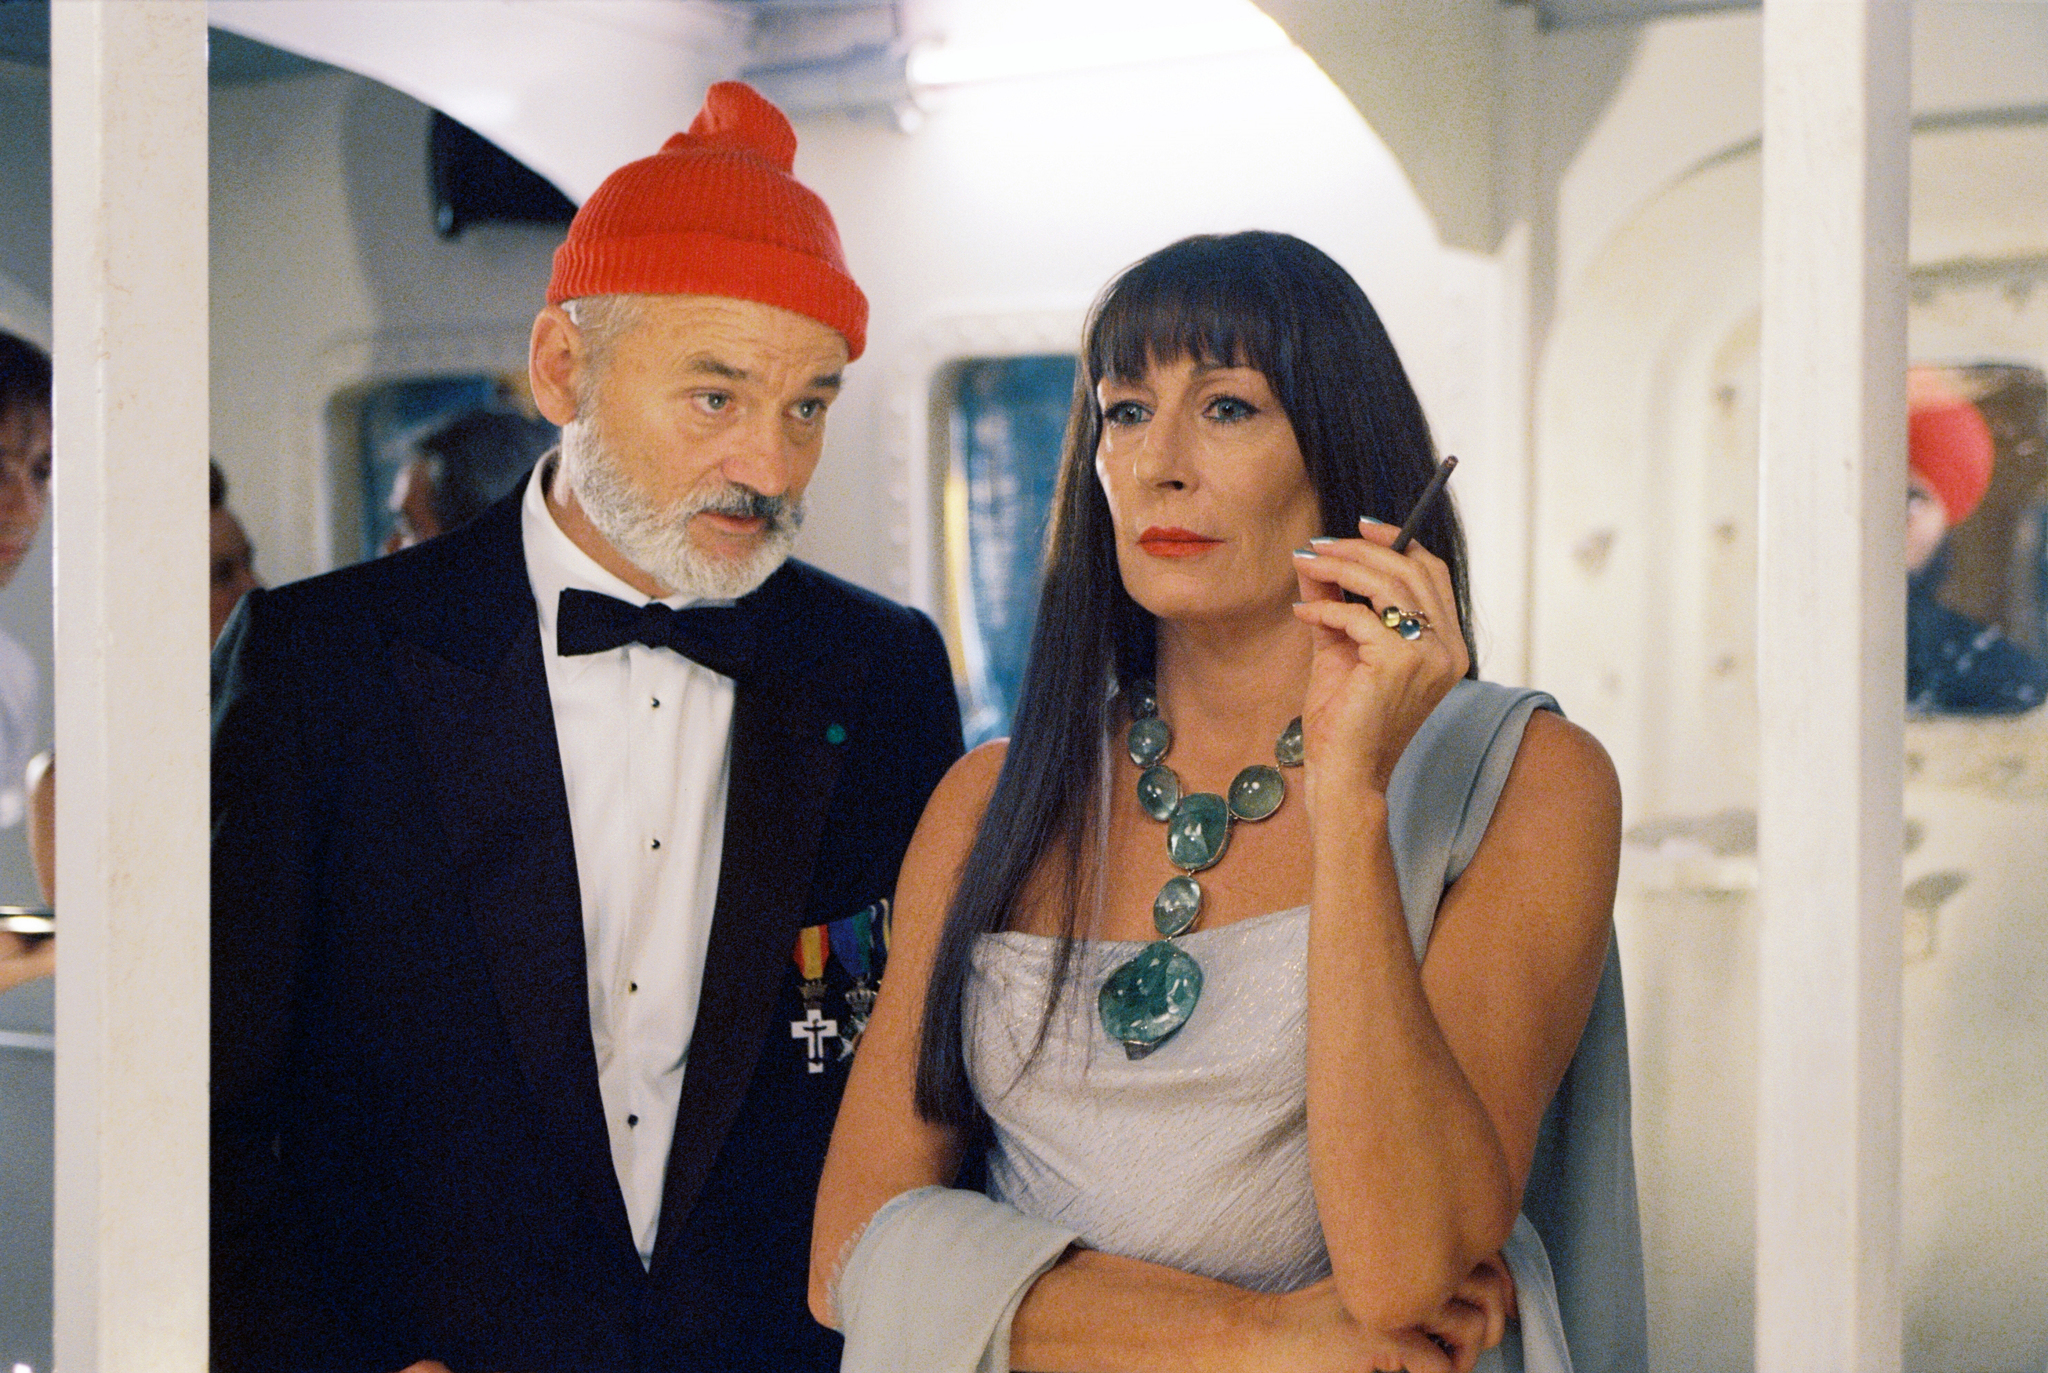 Still of Bill Murray and Anjelica Huston in The Life Aquatic with Steve Zissou (2004)